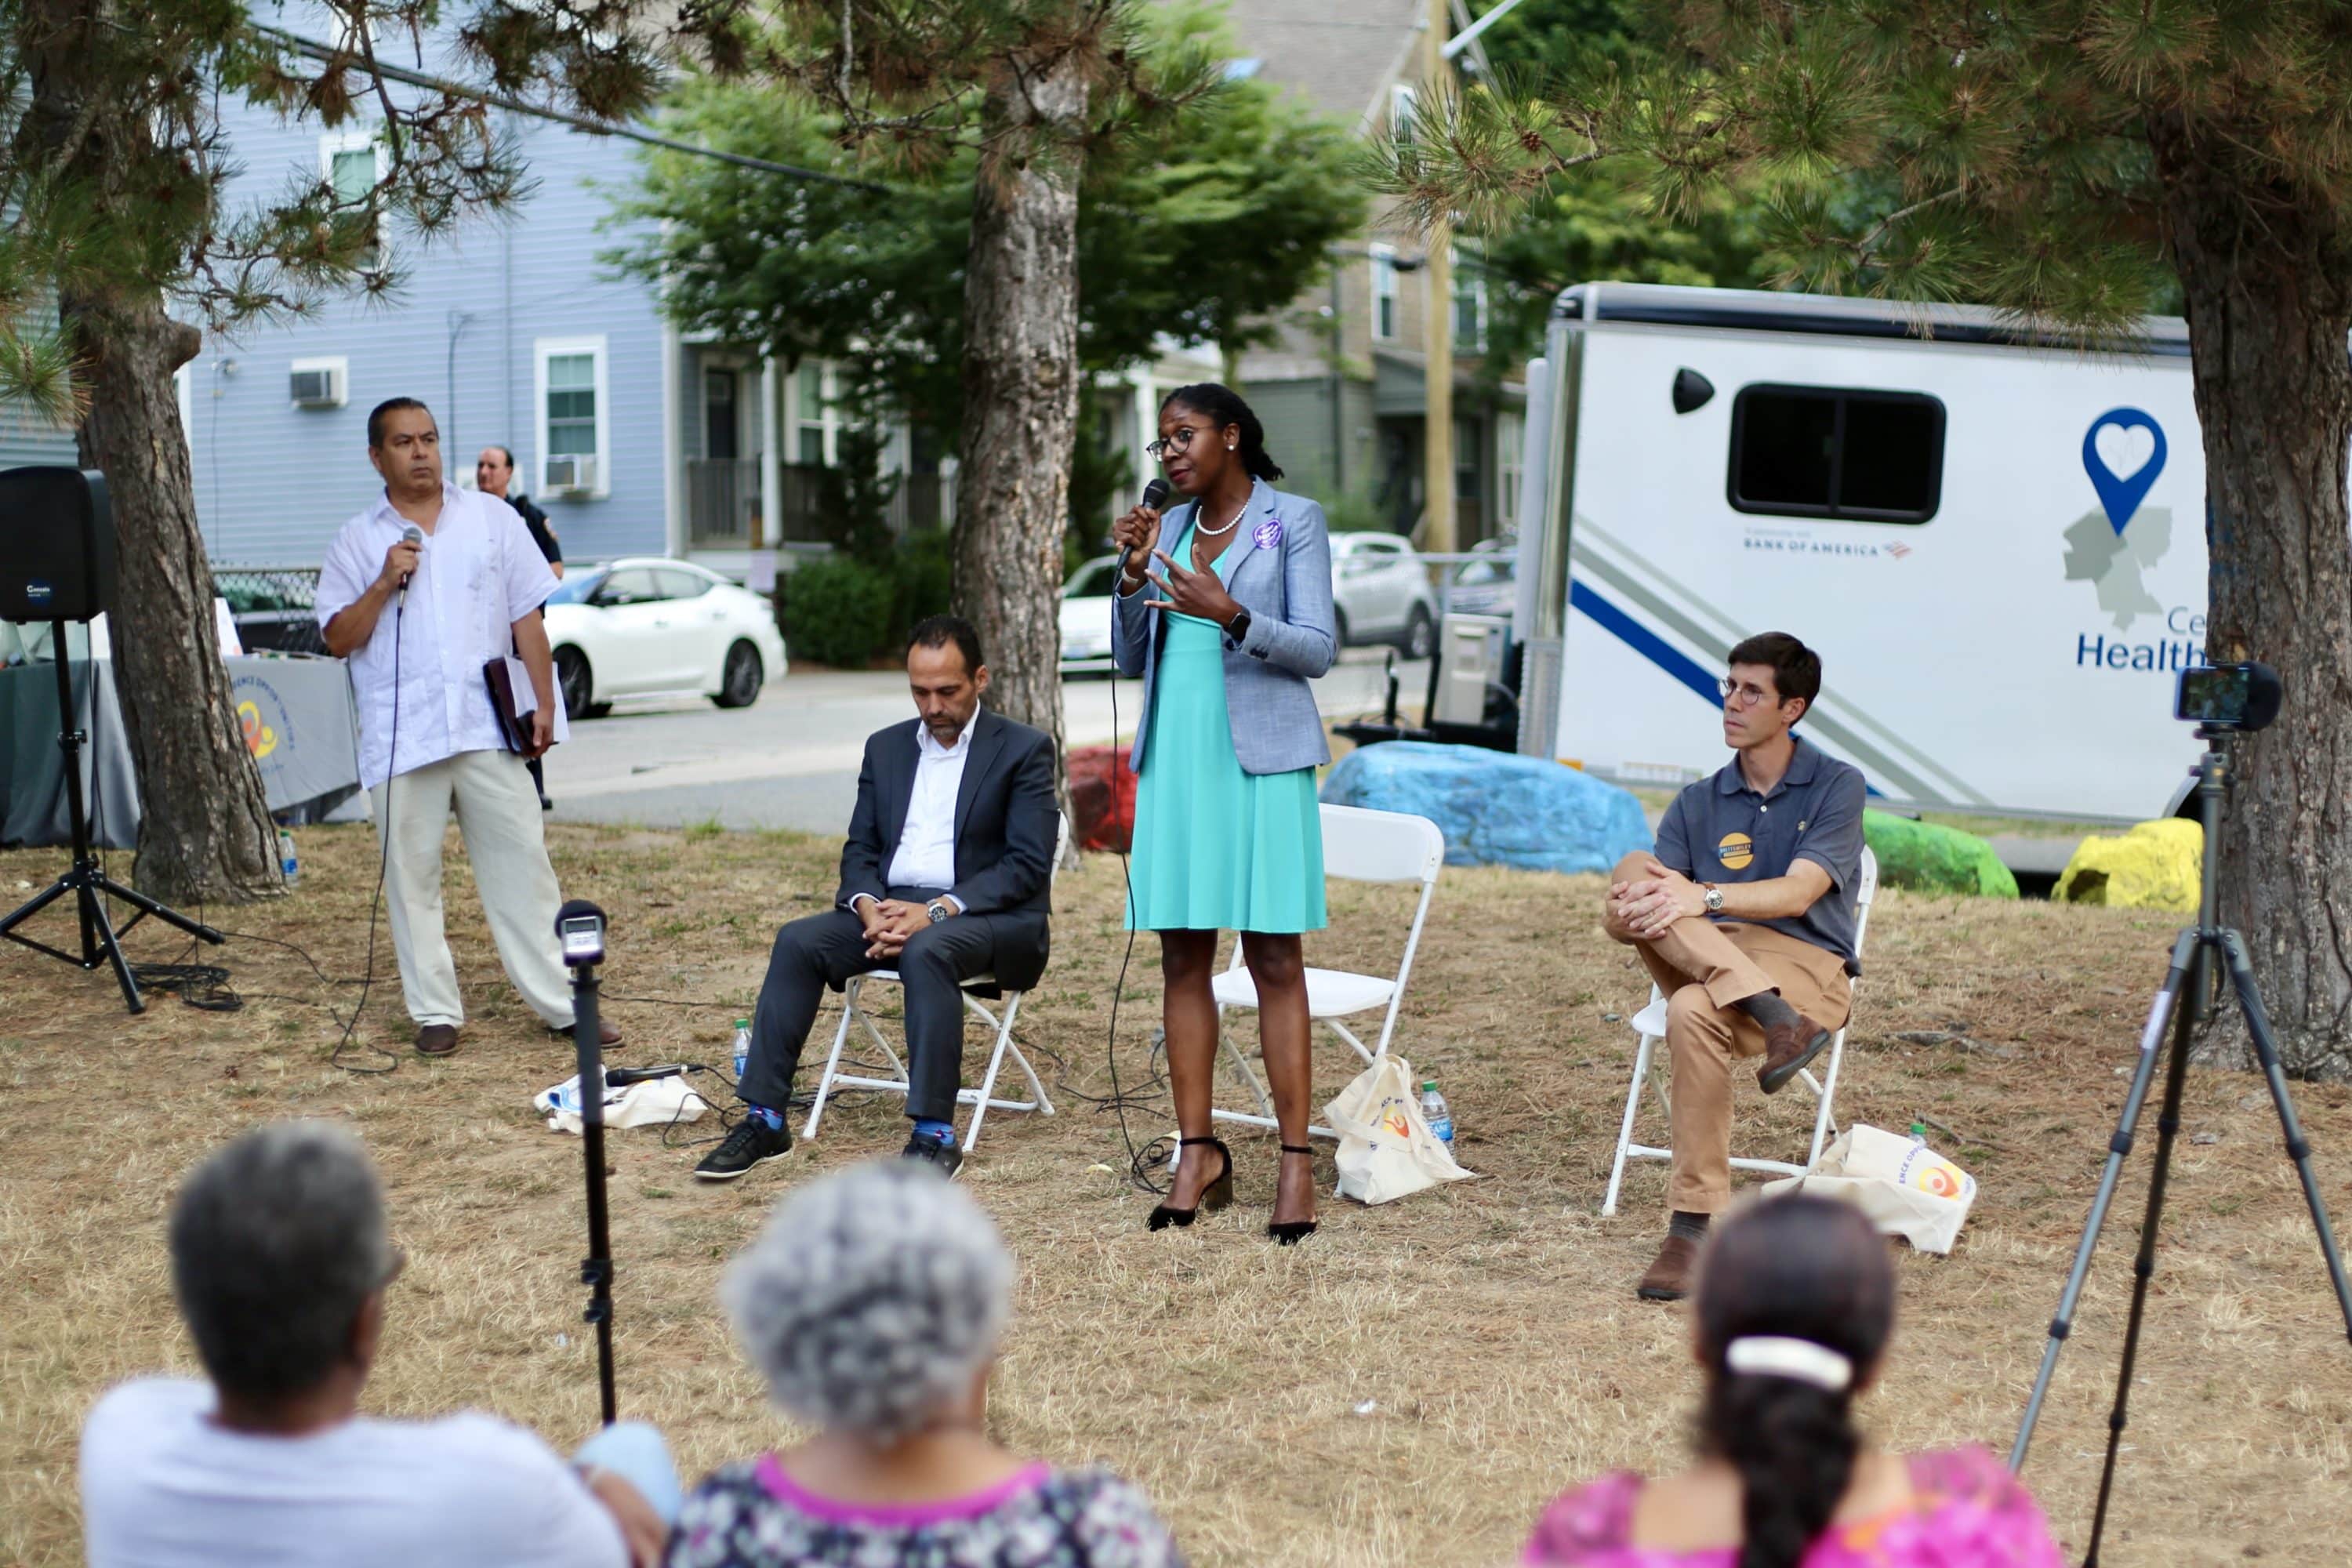 Rhode Island: Mayoral forum challenges candidates on health equity in Providence